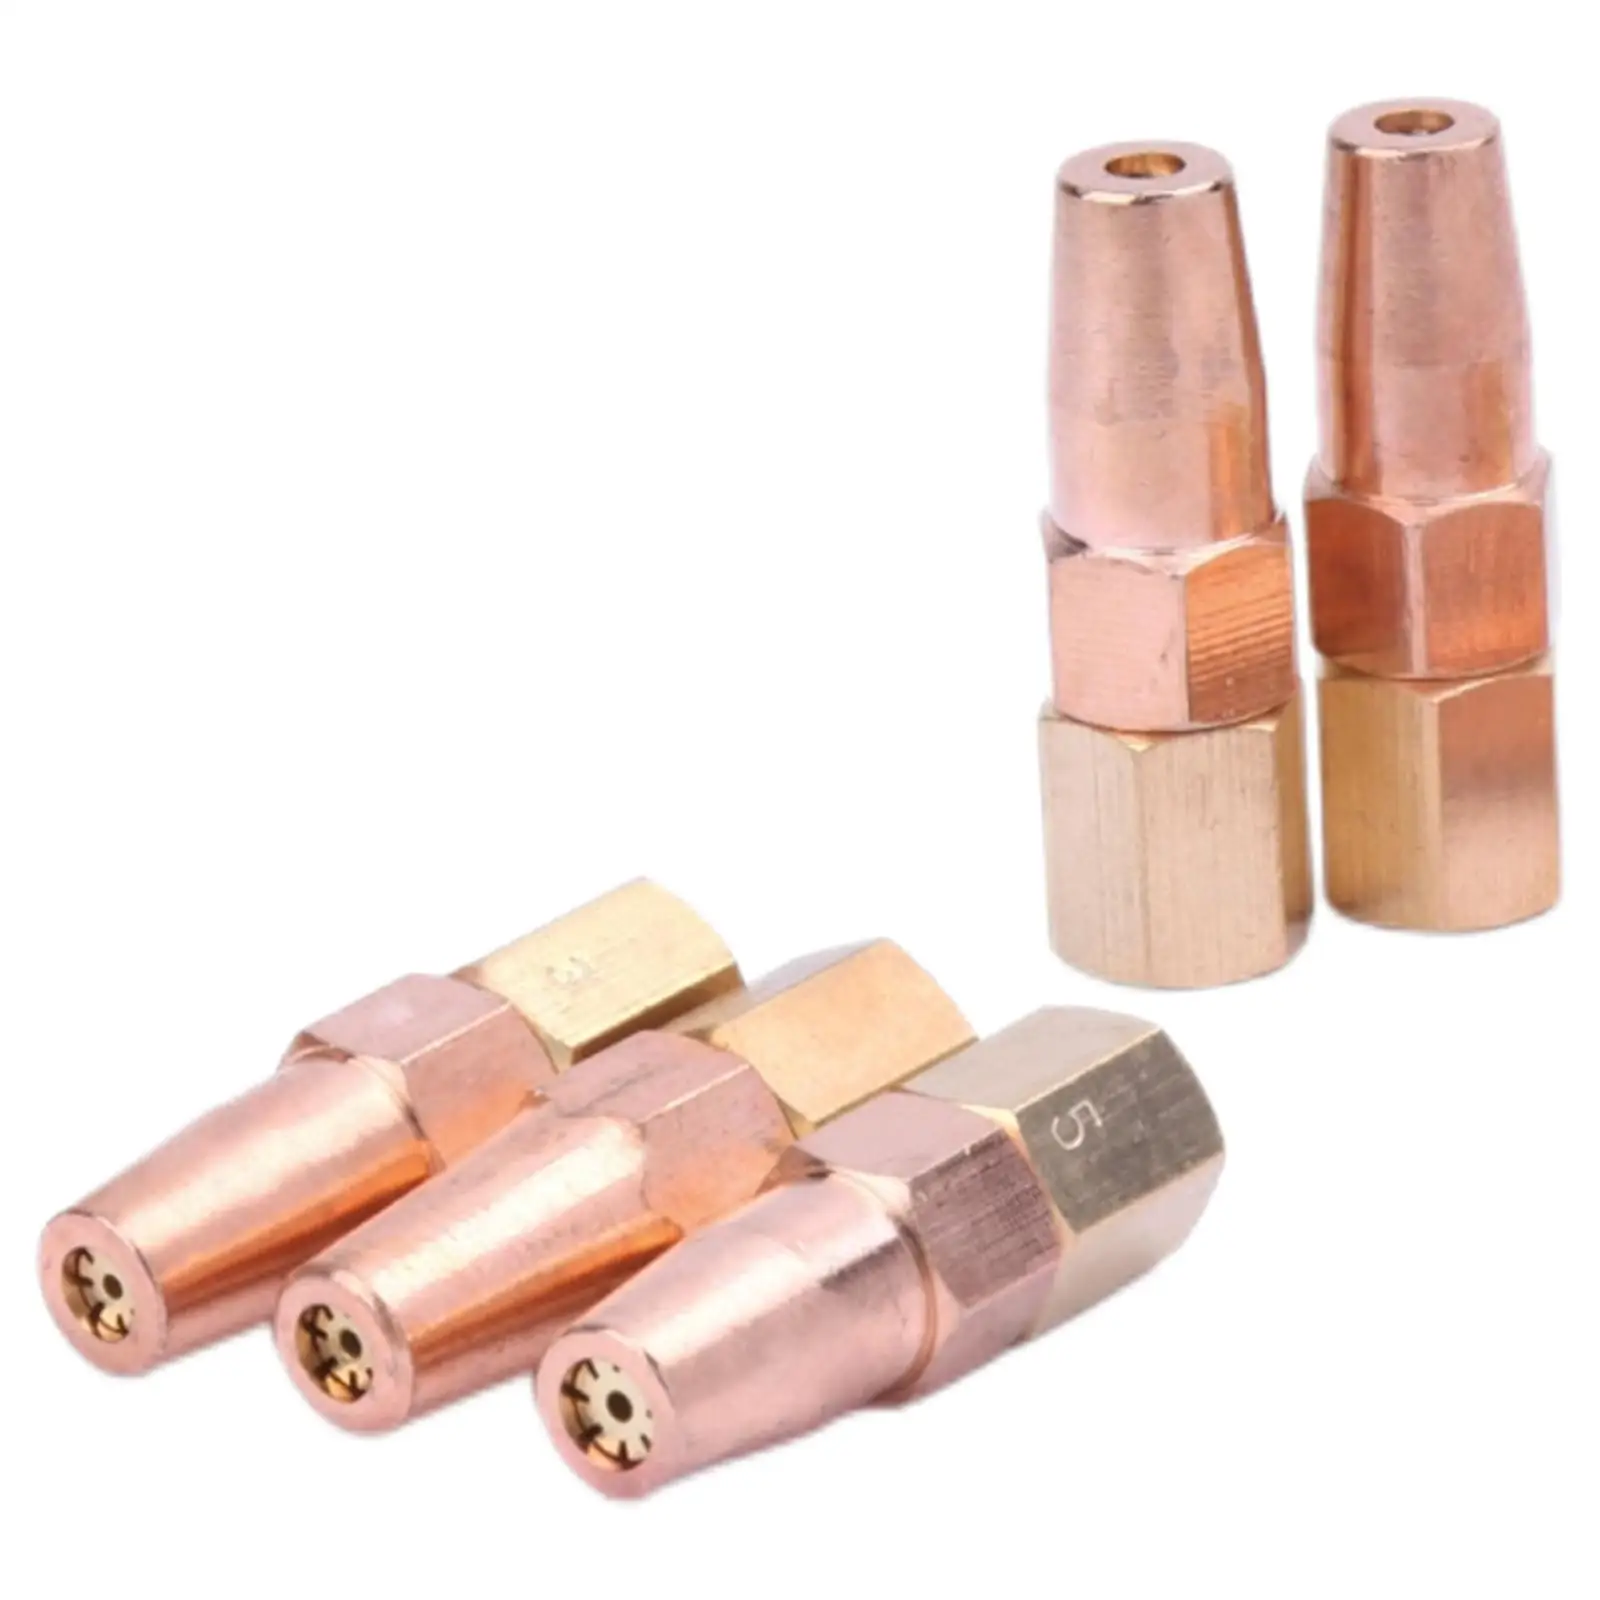 5x Propane Gas Welding Nozzle H01-6 Heating Nozzle Tip for Heat Treating